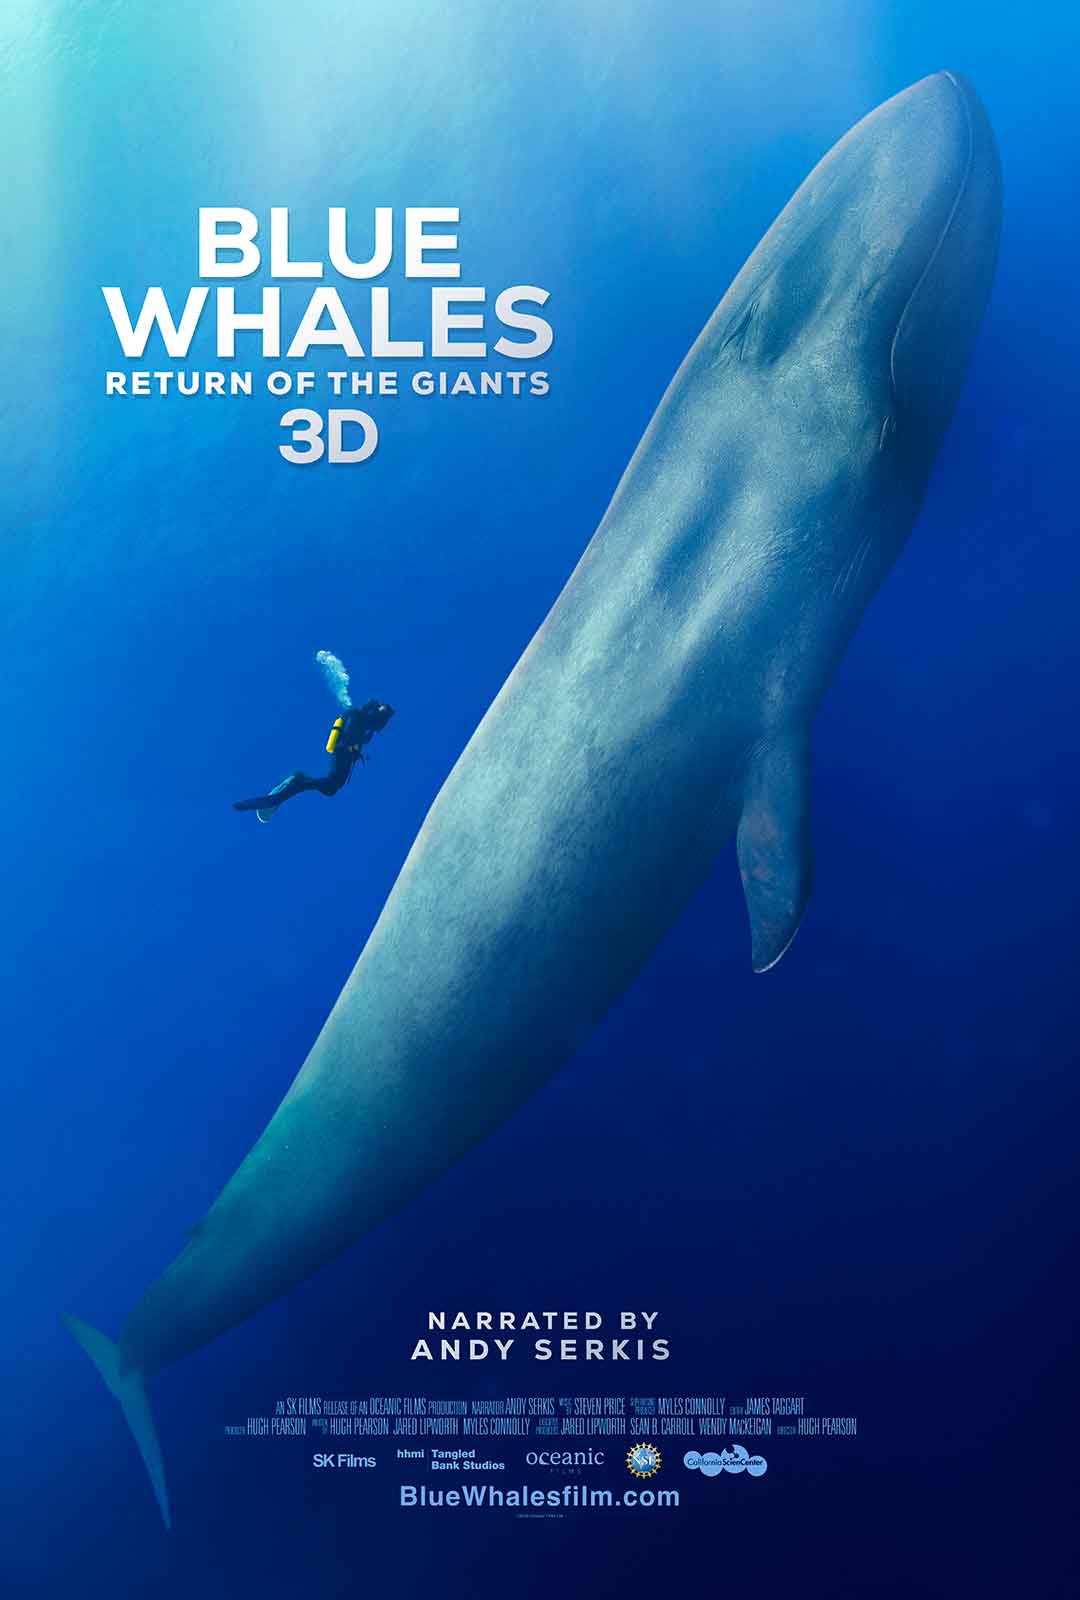 Blue Whales: Return of the Giants 3D poster with a diver and a blue whale